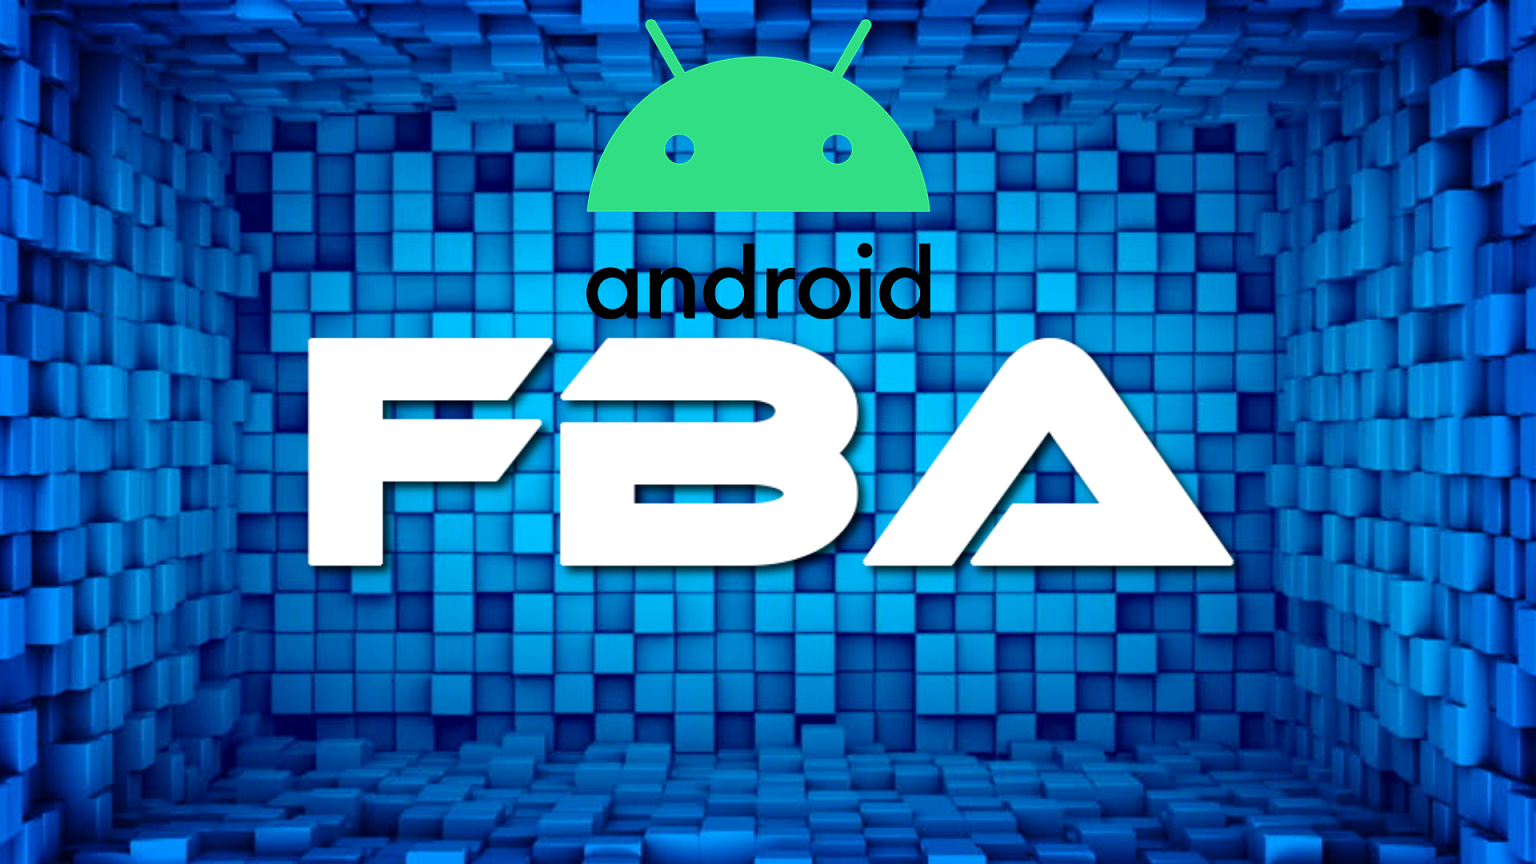 fba4droid apk download for android